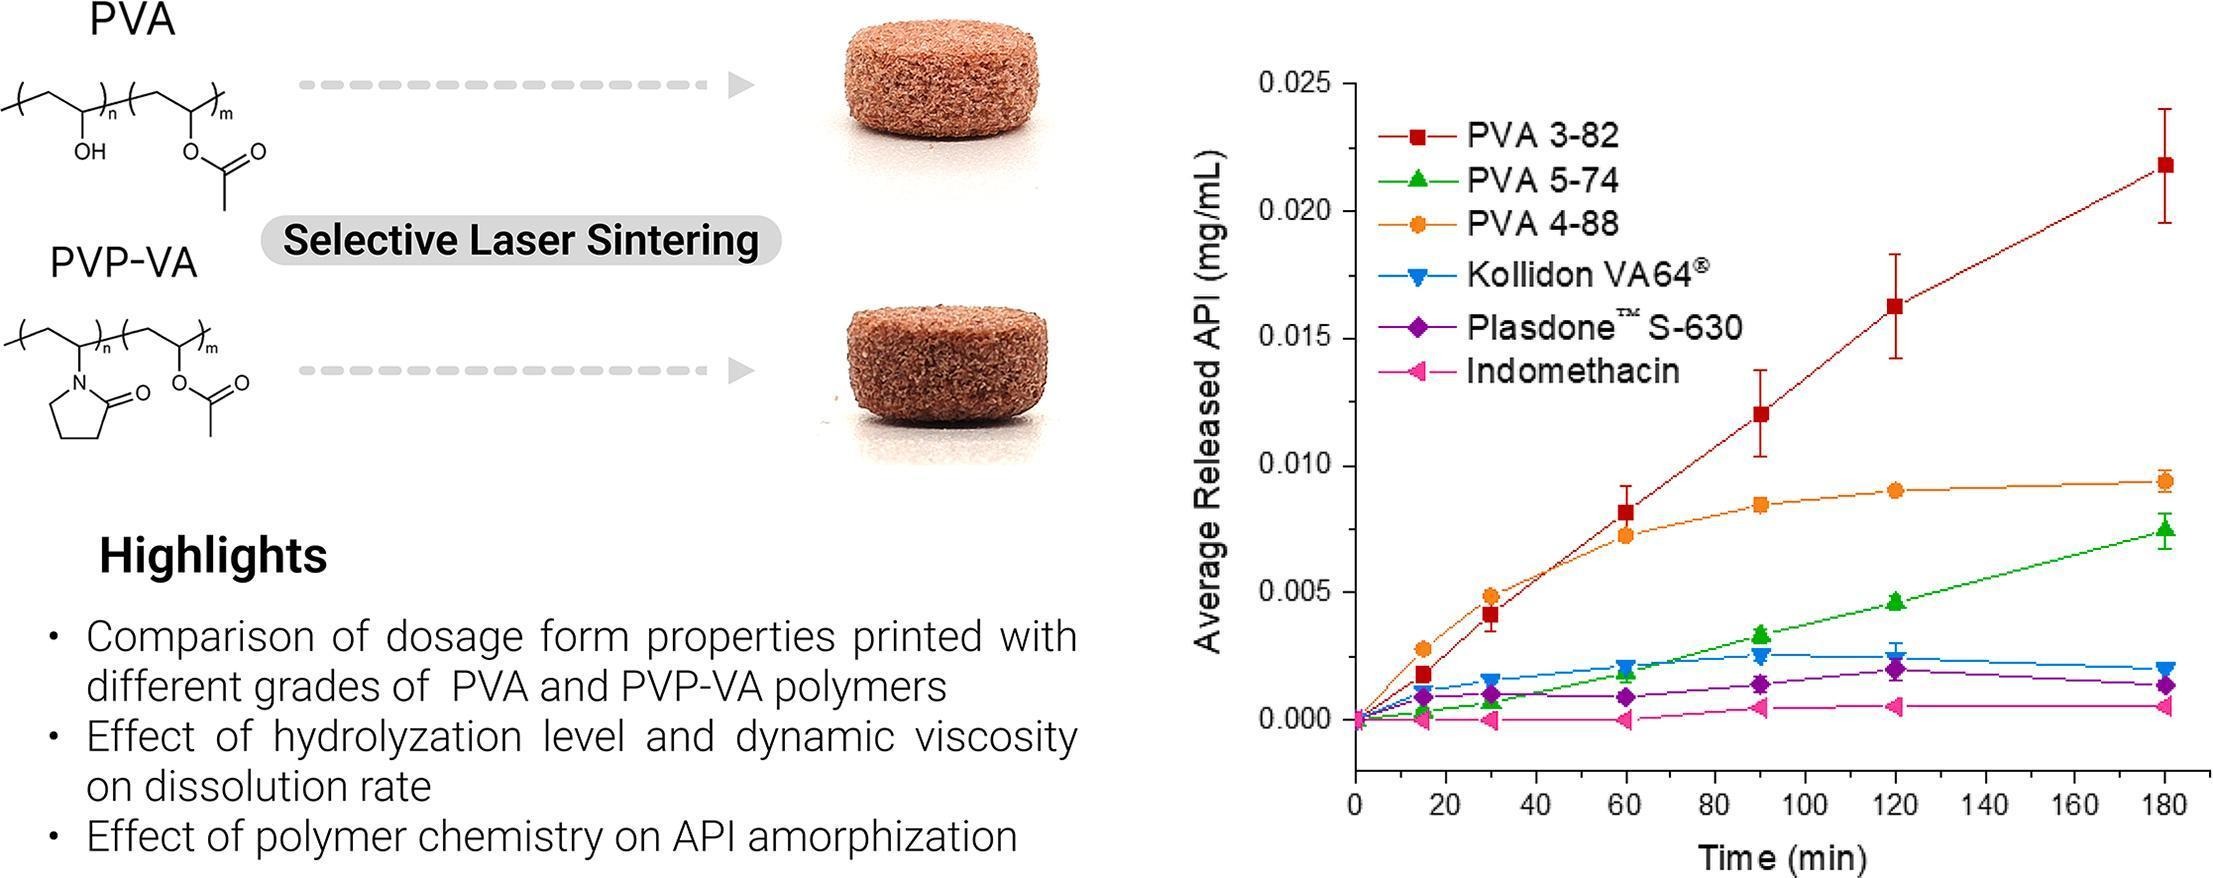 Impact of polymer chemistry on critical quality attributes of selective laser sintering 3D printed solid oral dosage forms